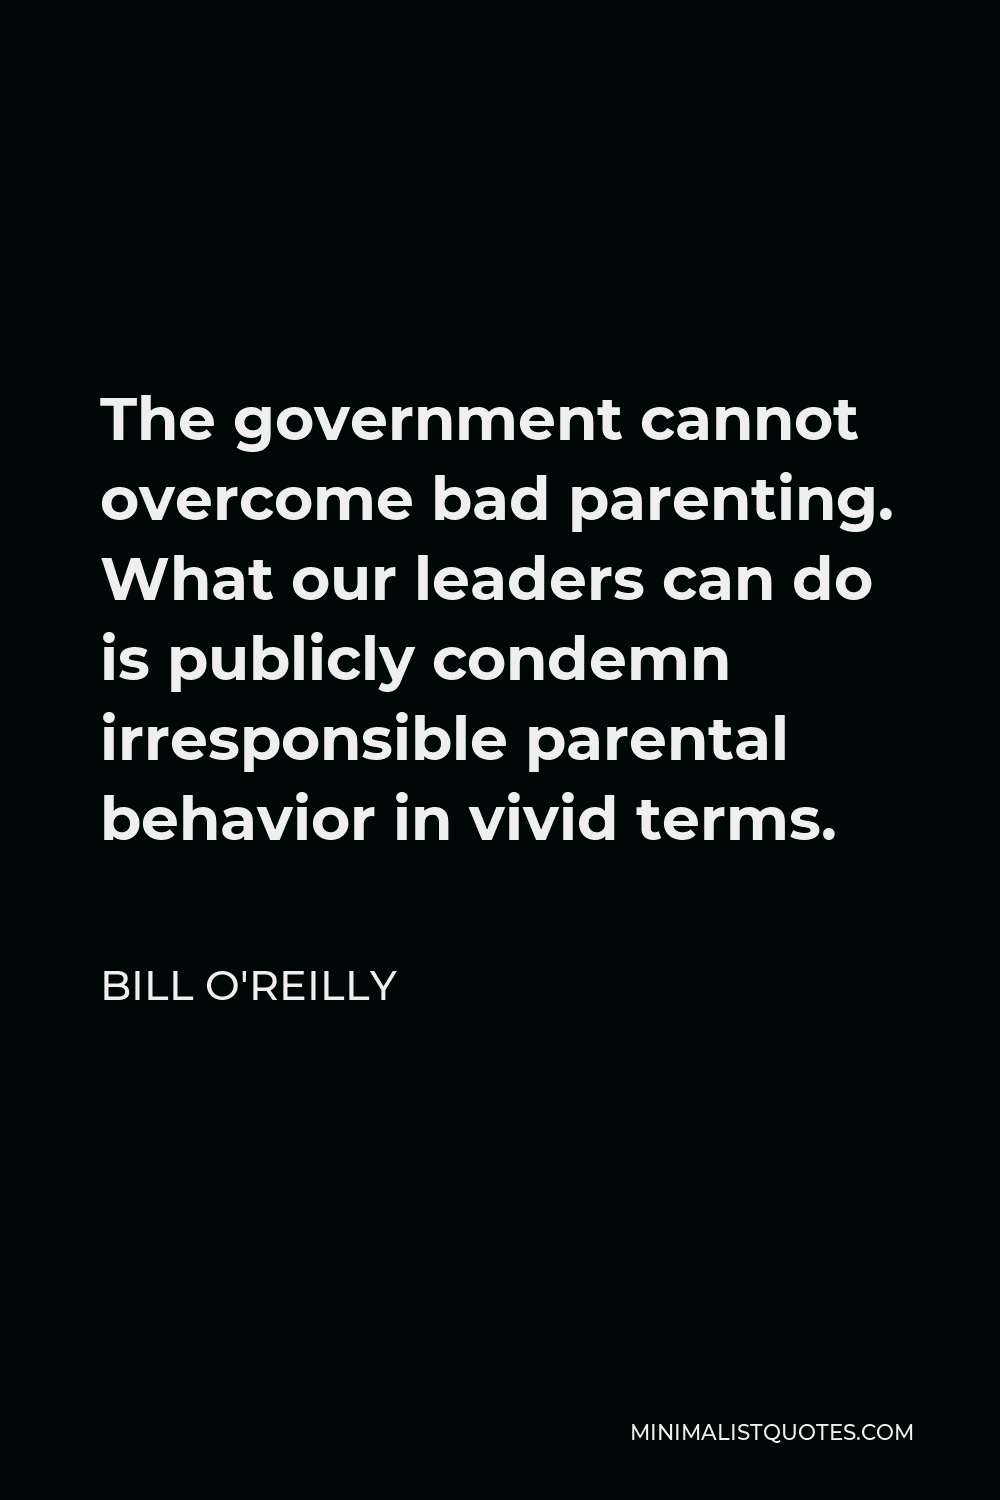 Bill O'Reilly Quote - The government cannot overcome bad parenting. What our leaders can do is publicly condemn irresponsible parental behavior in vivid terms.